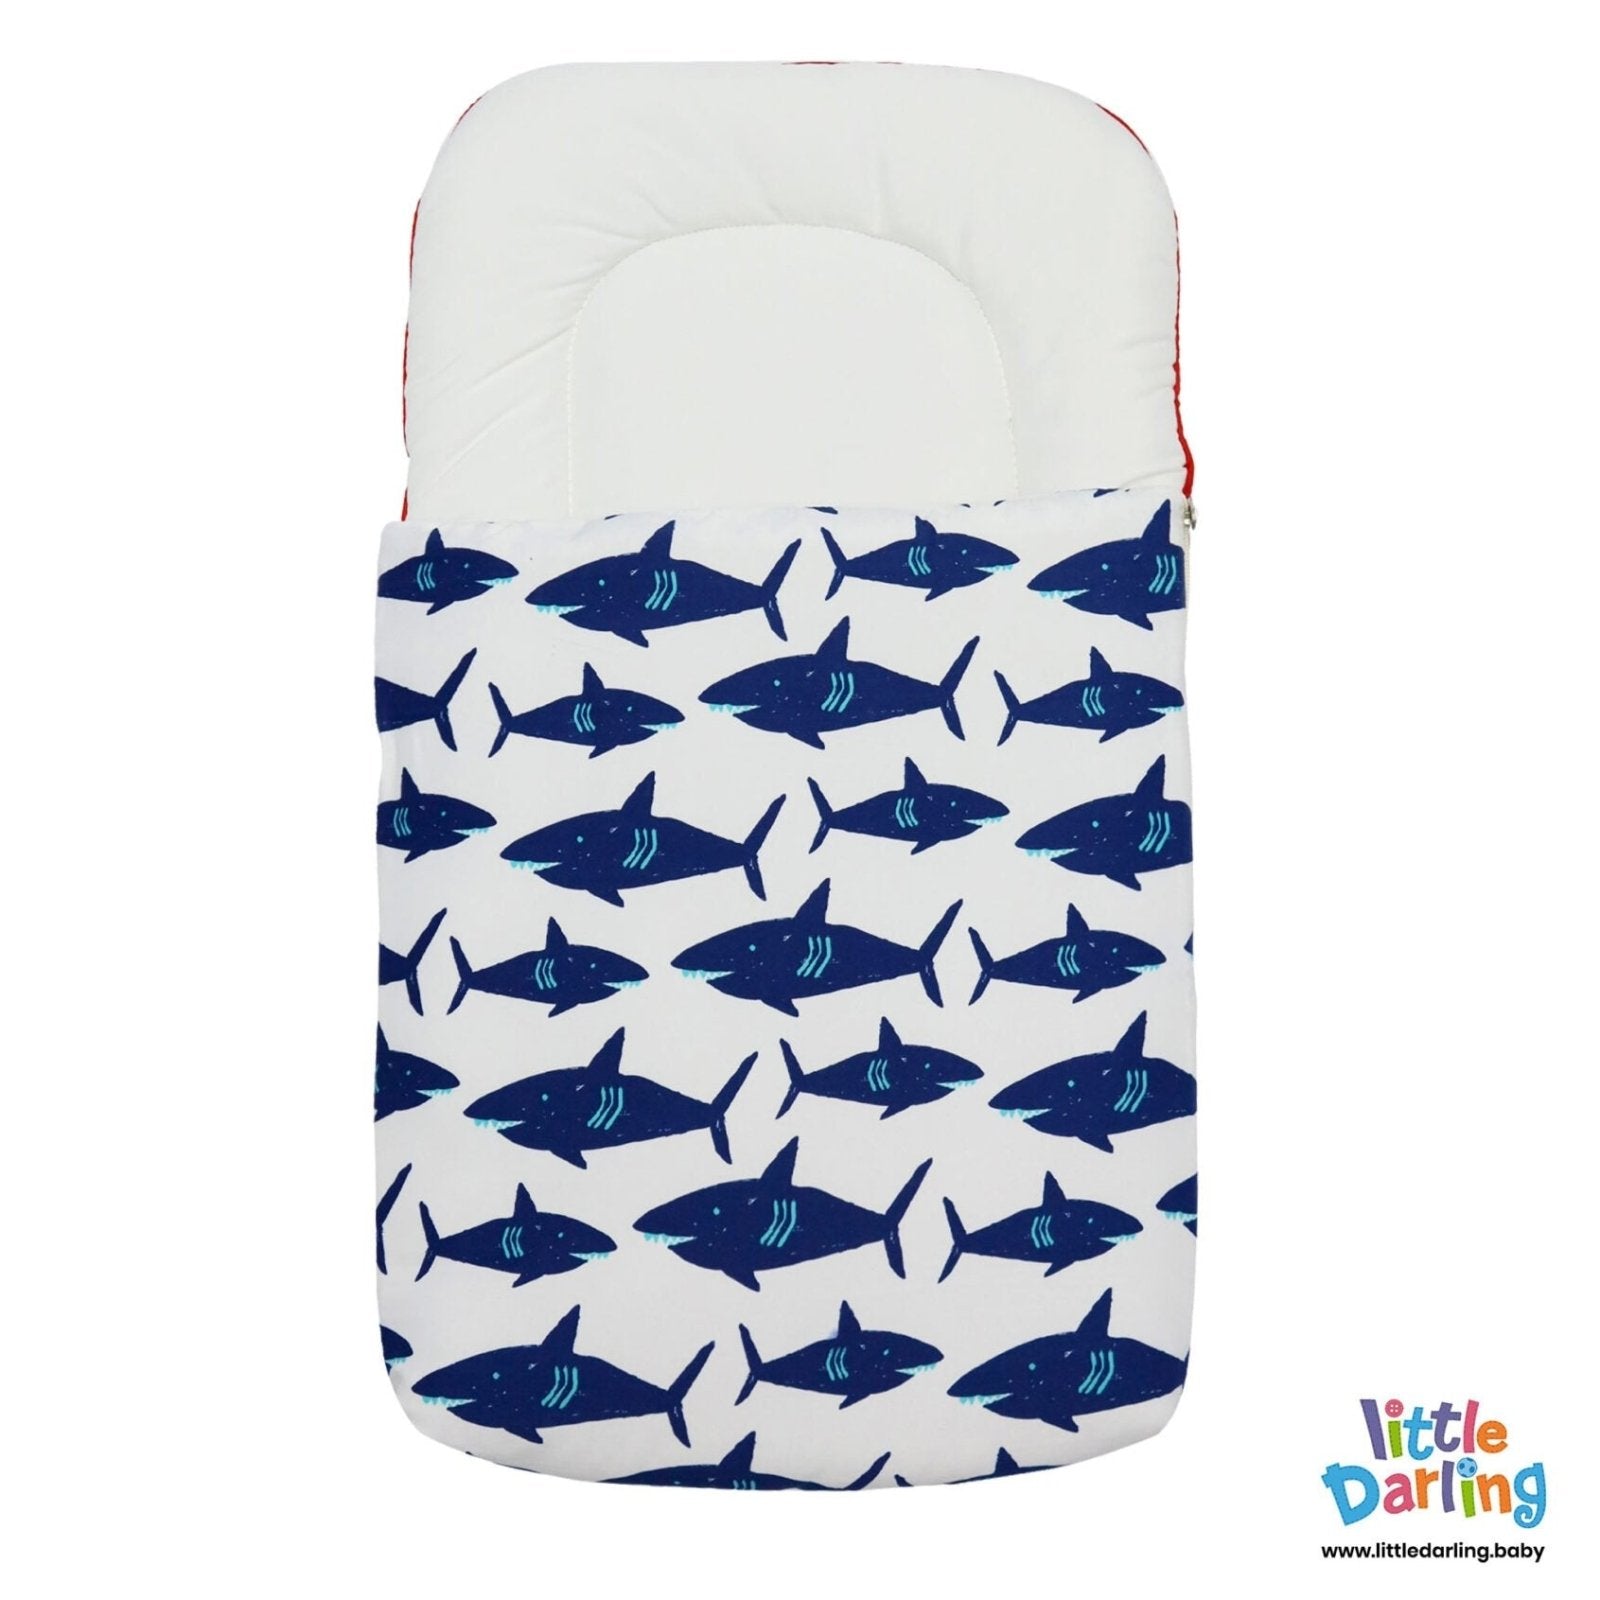 Baby Carry Nest Shark Print by Little Darling